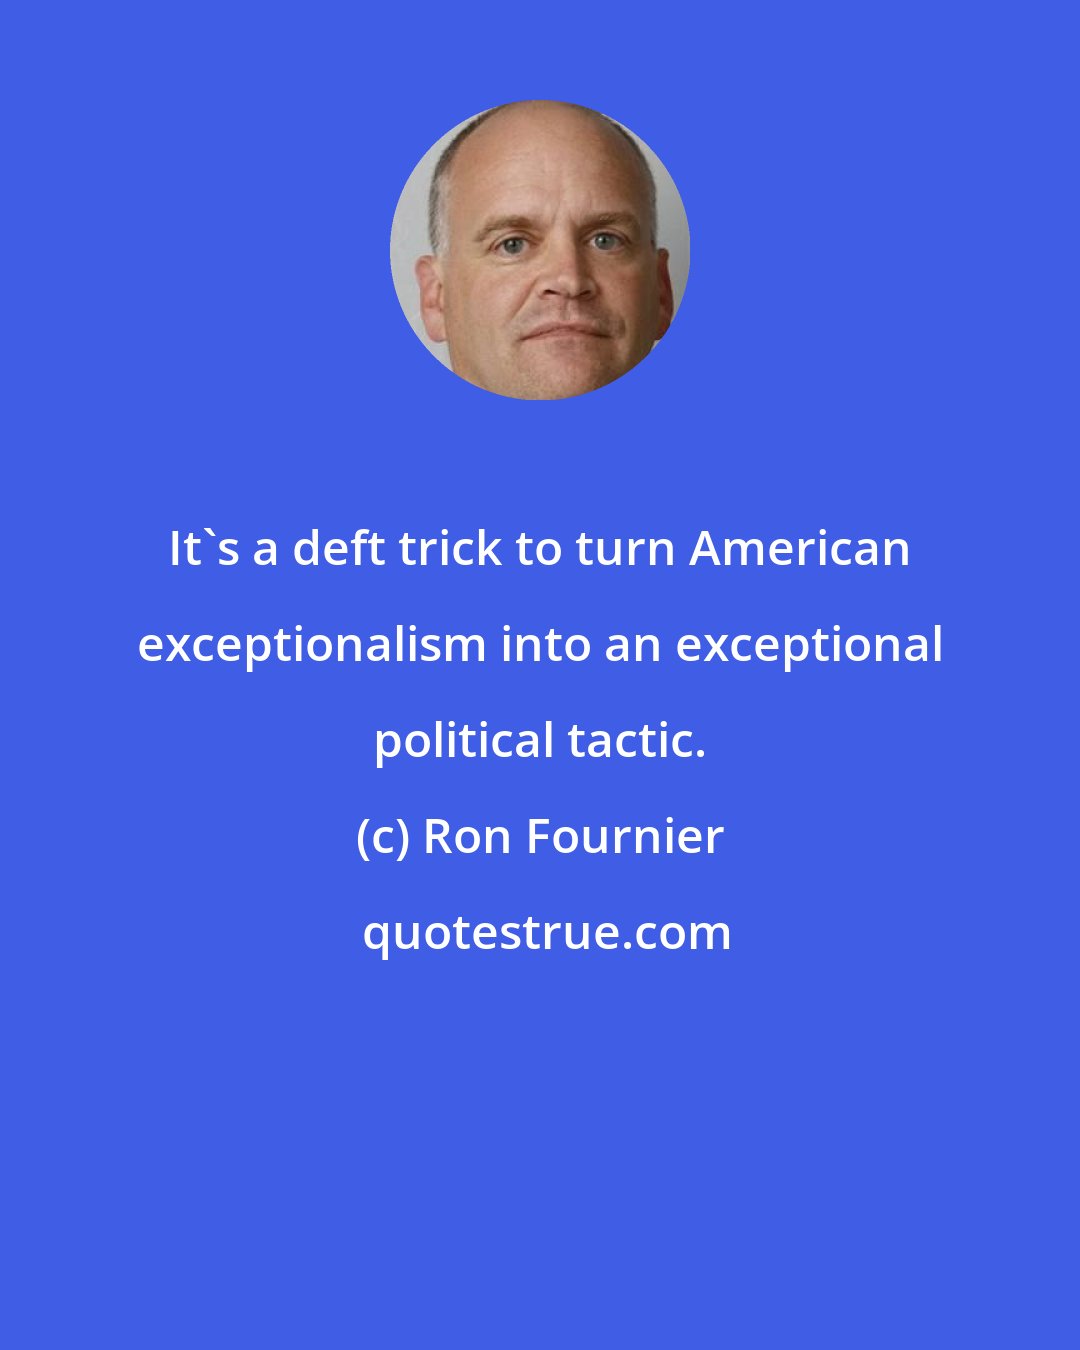 Ron Fournier: It's a deft trick to turn American exceptionalism into an exceptional political tactic.